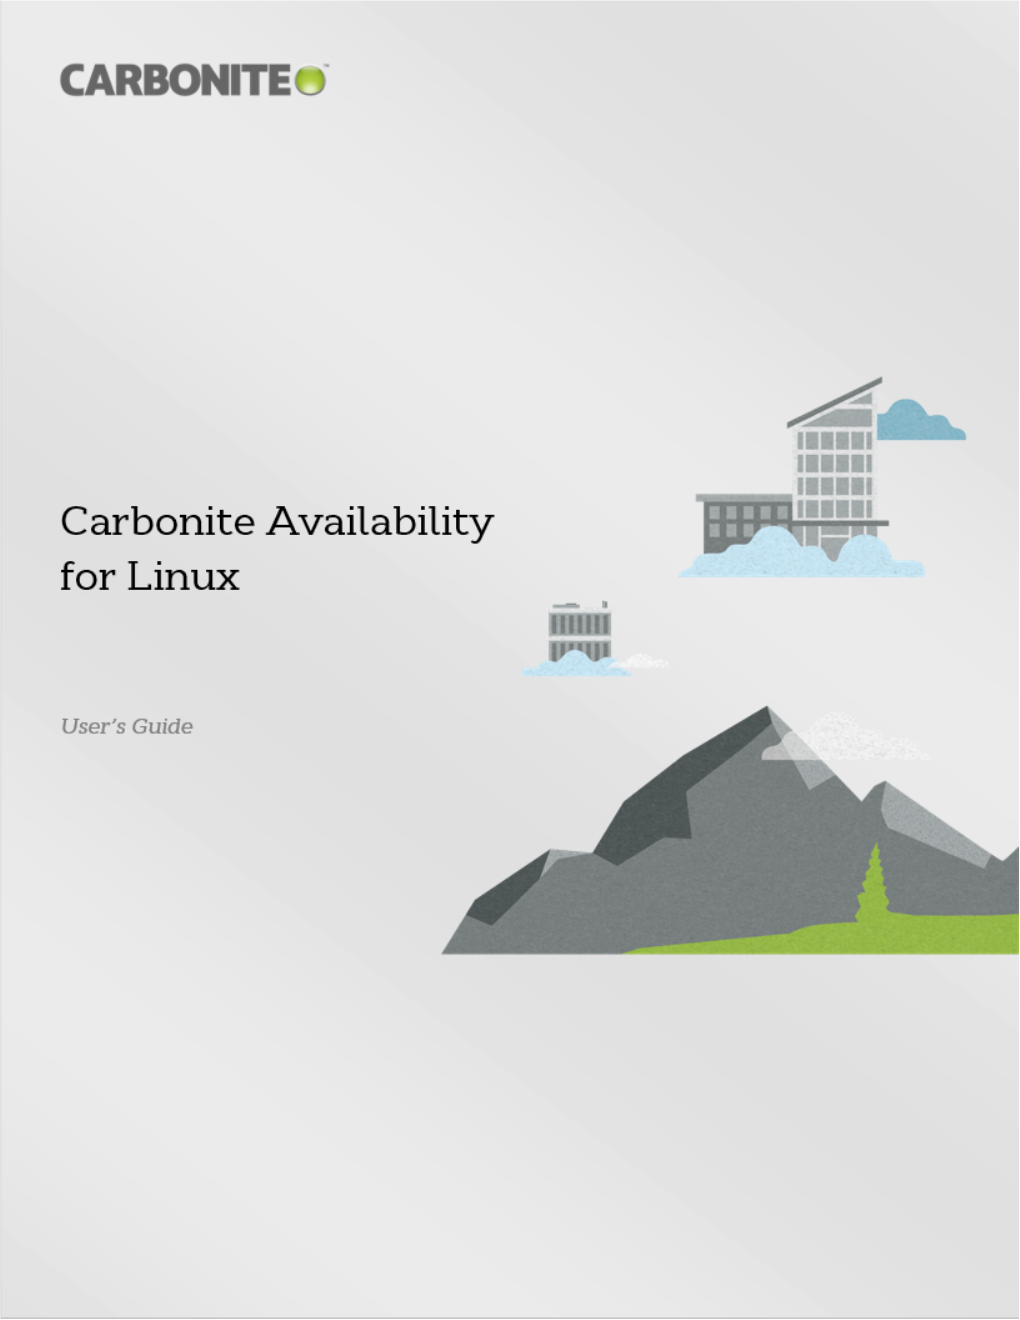 Carbonite Availability for Linux User's Guide Version 8.1.1, Thursday, April 5, 2018 If You Need Technical Assistance, You Can Contact Customercare